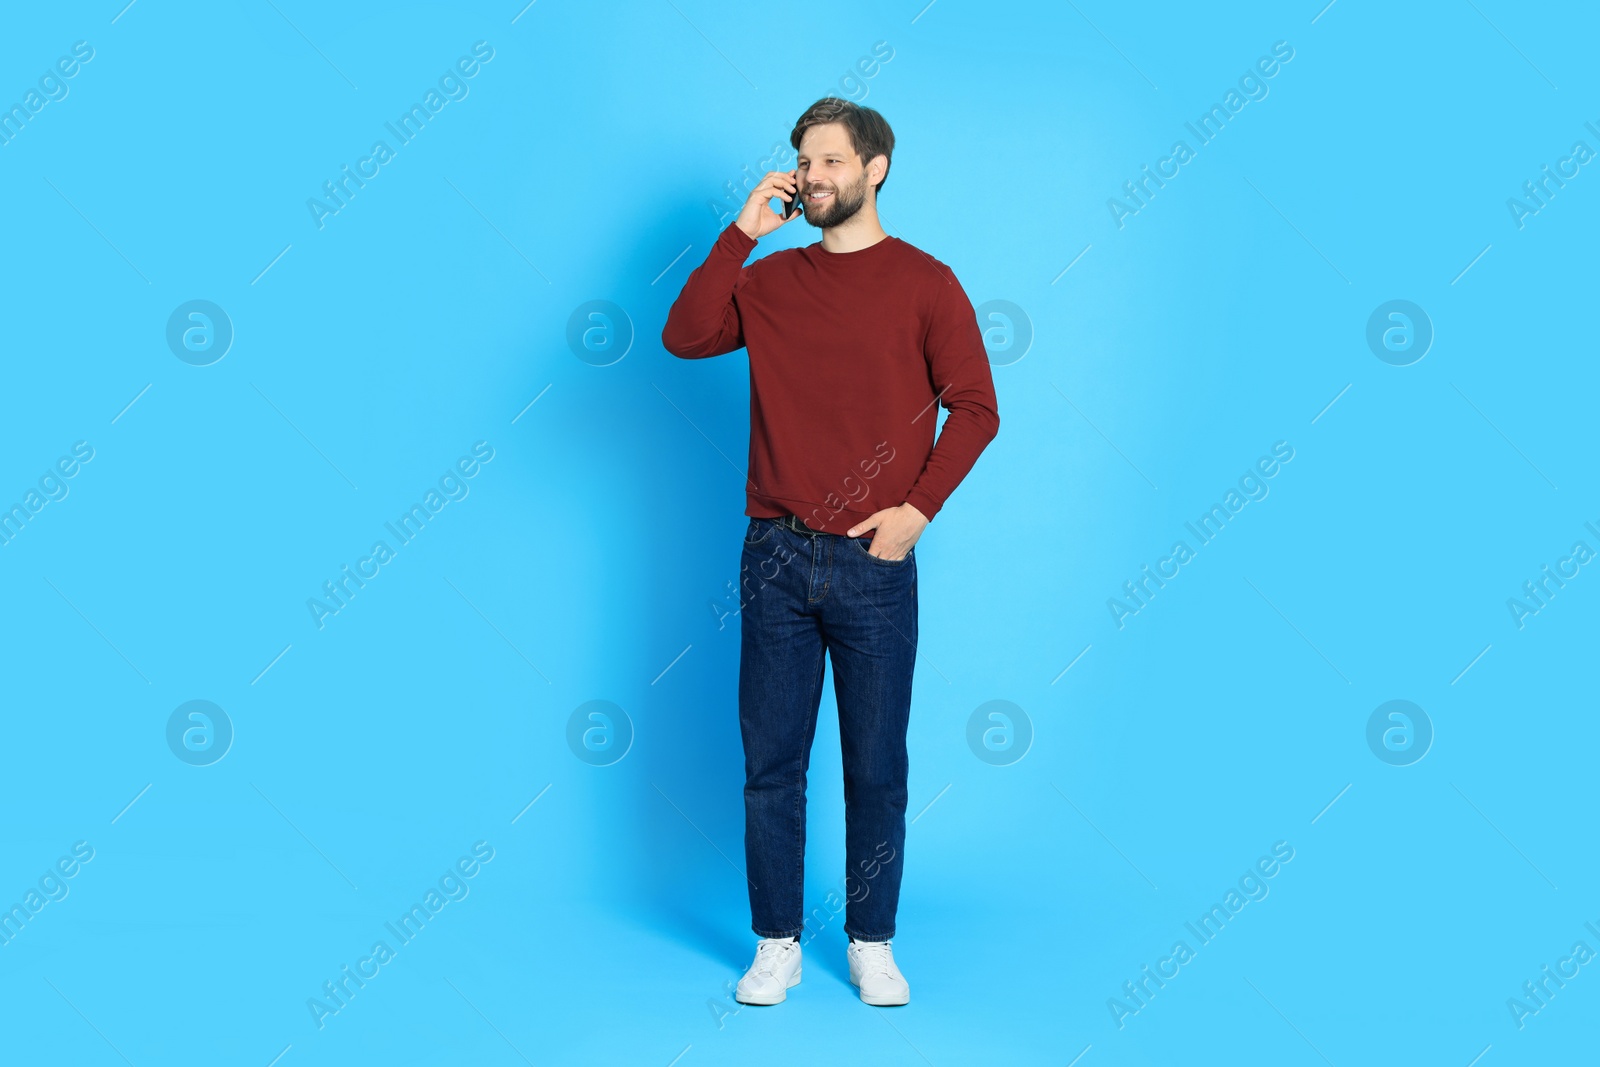 Photo of Man talking on smartphone against light blue background